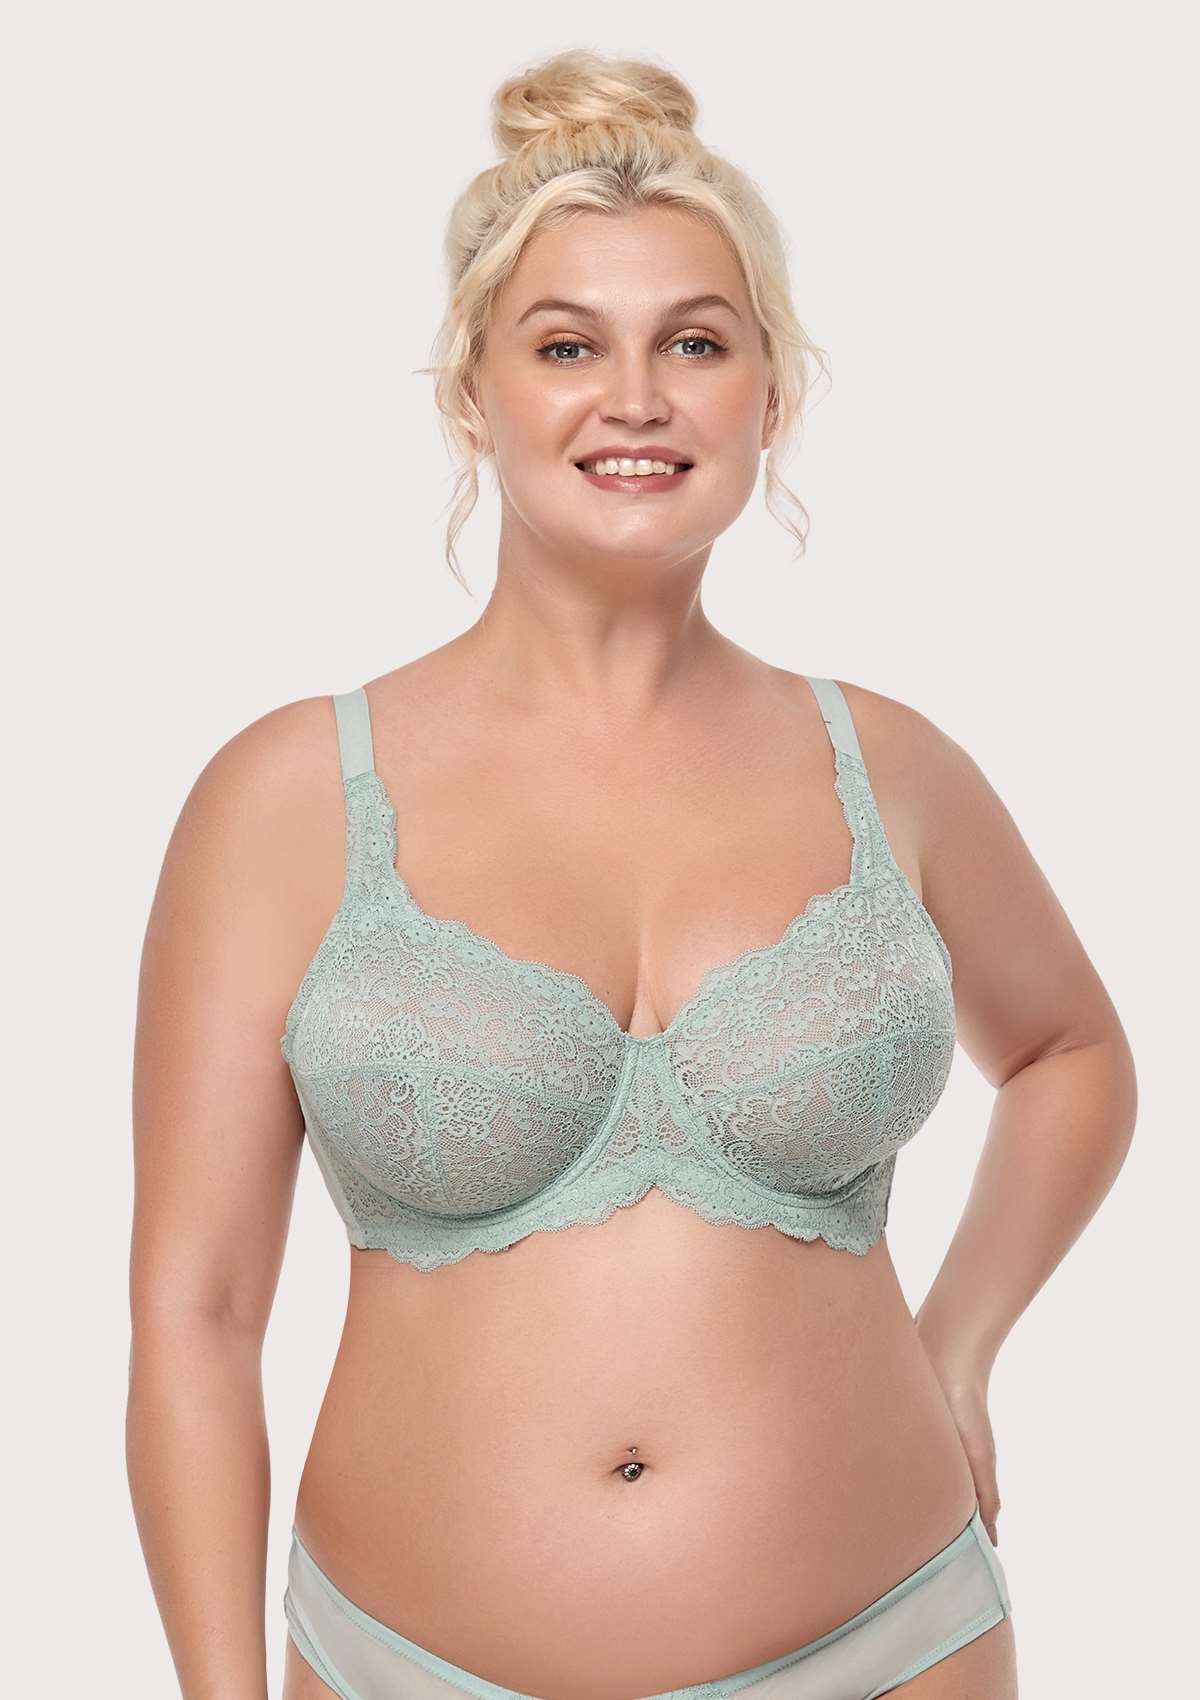 HSIA All-Over Floral Lace: Best Bra For Elderly With Sagging Breasts - Crystal Blue / 42 / C